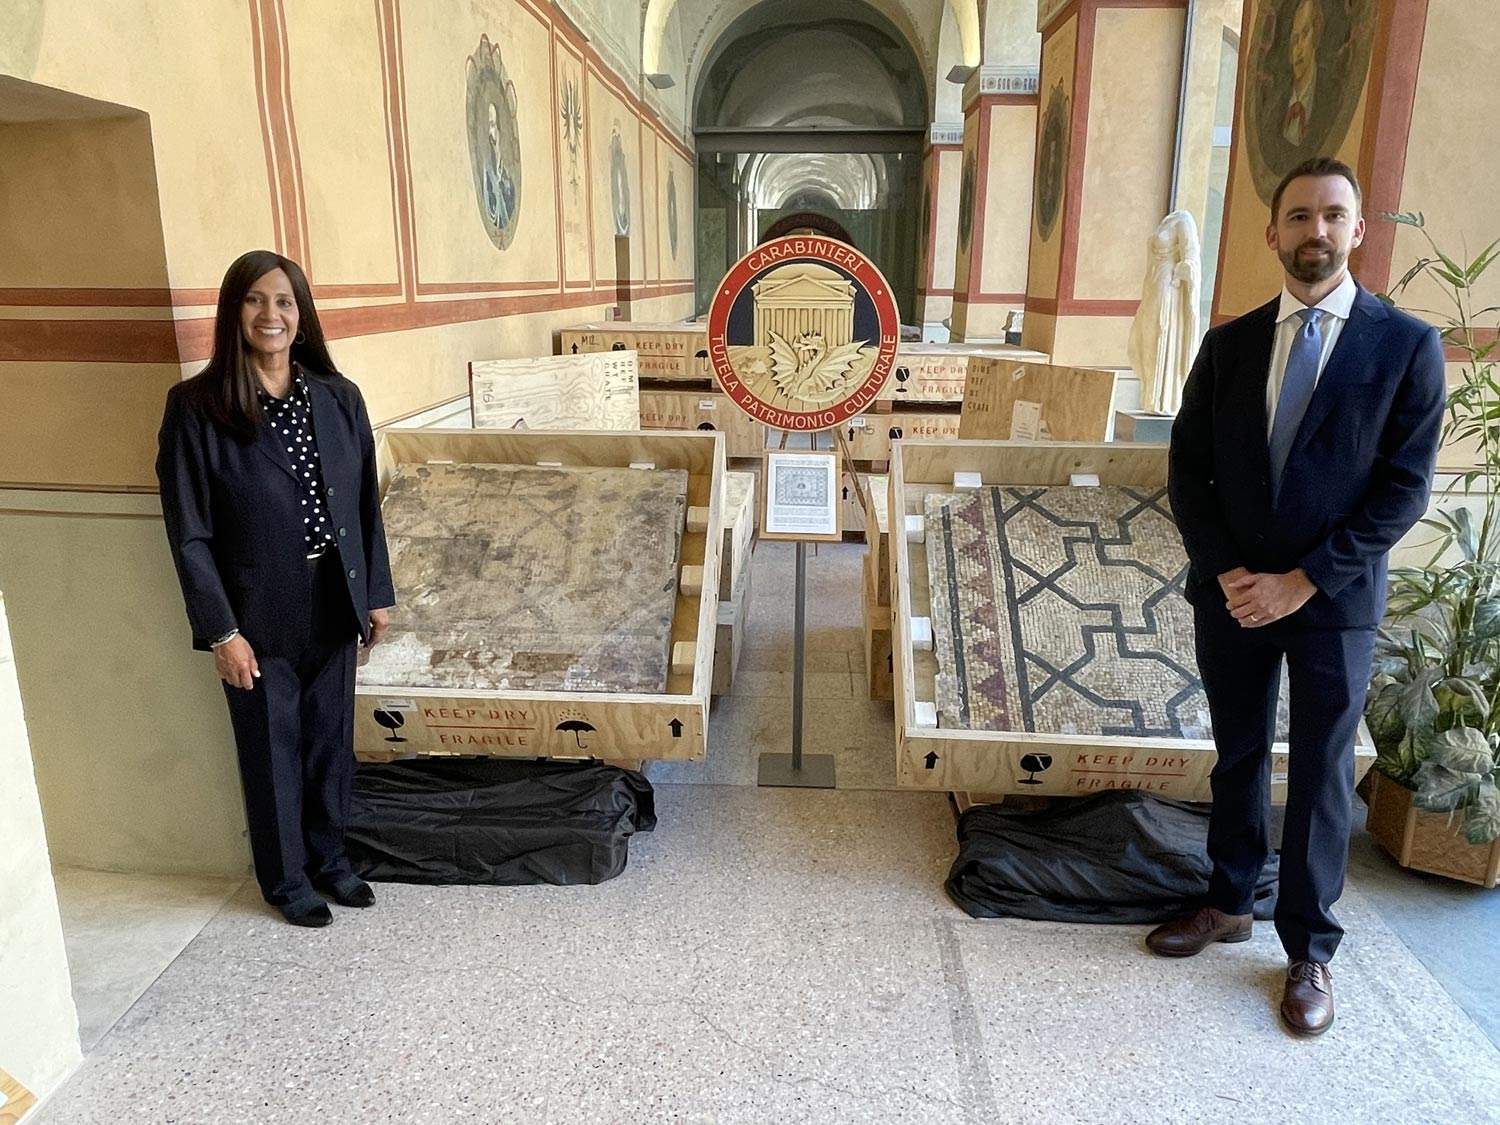 A large Roman mosaic depicting Medusa will be repatriated to Italy from the U.S.